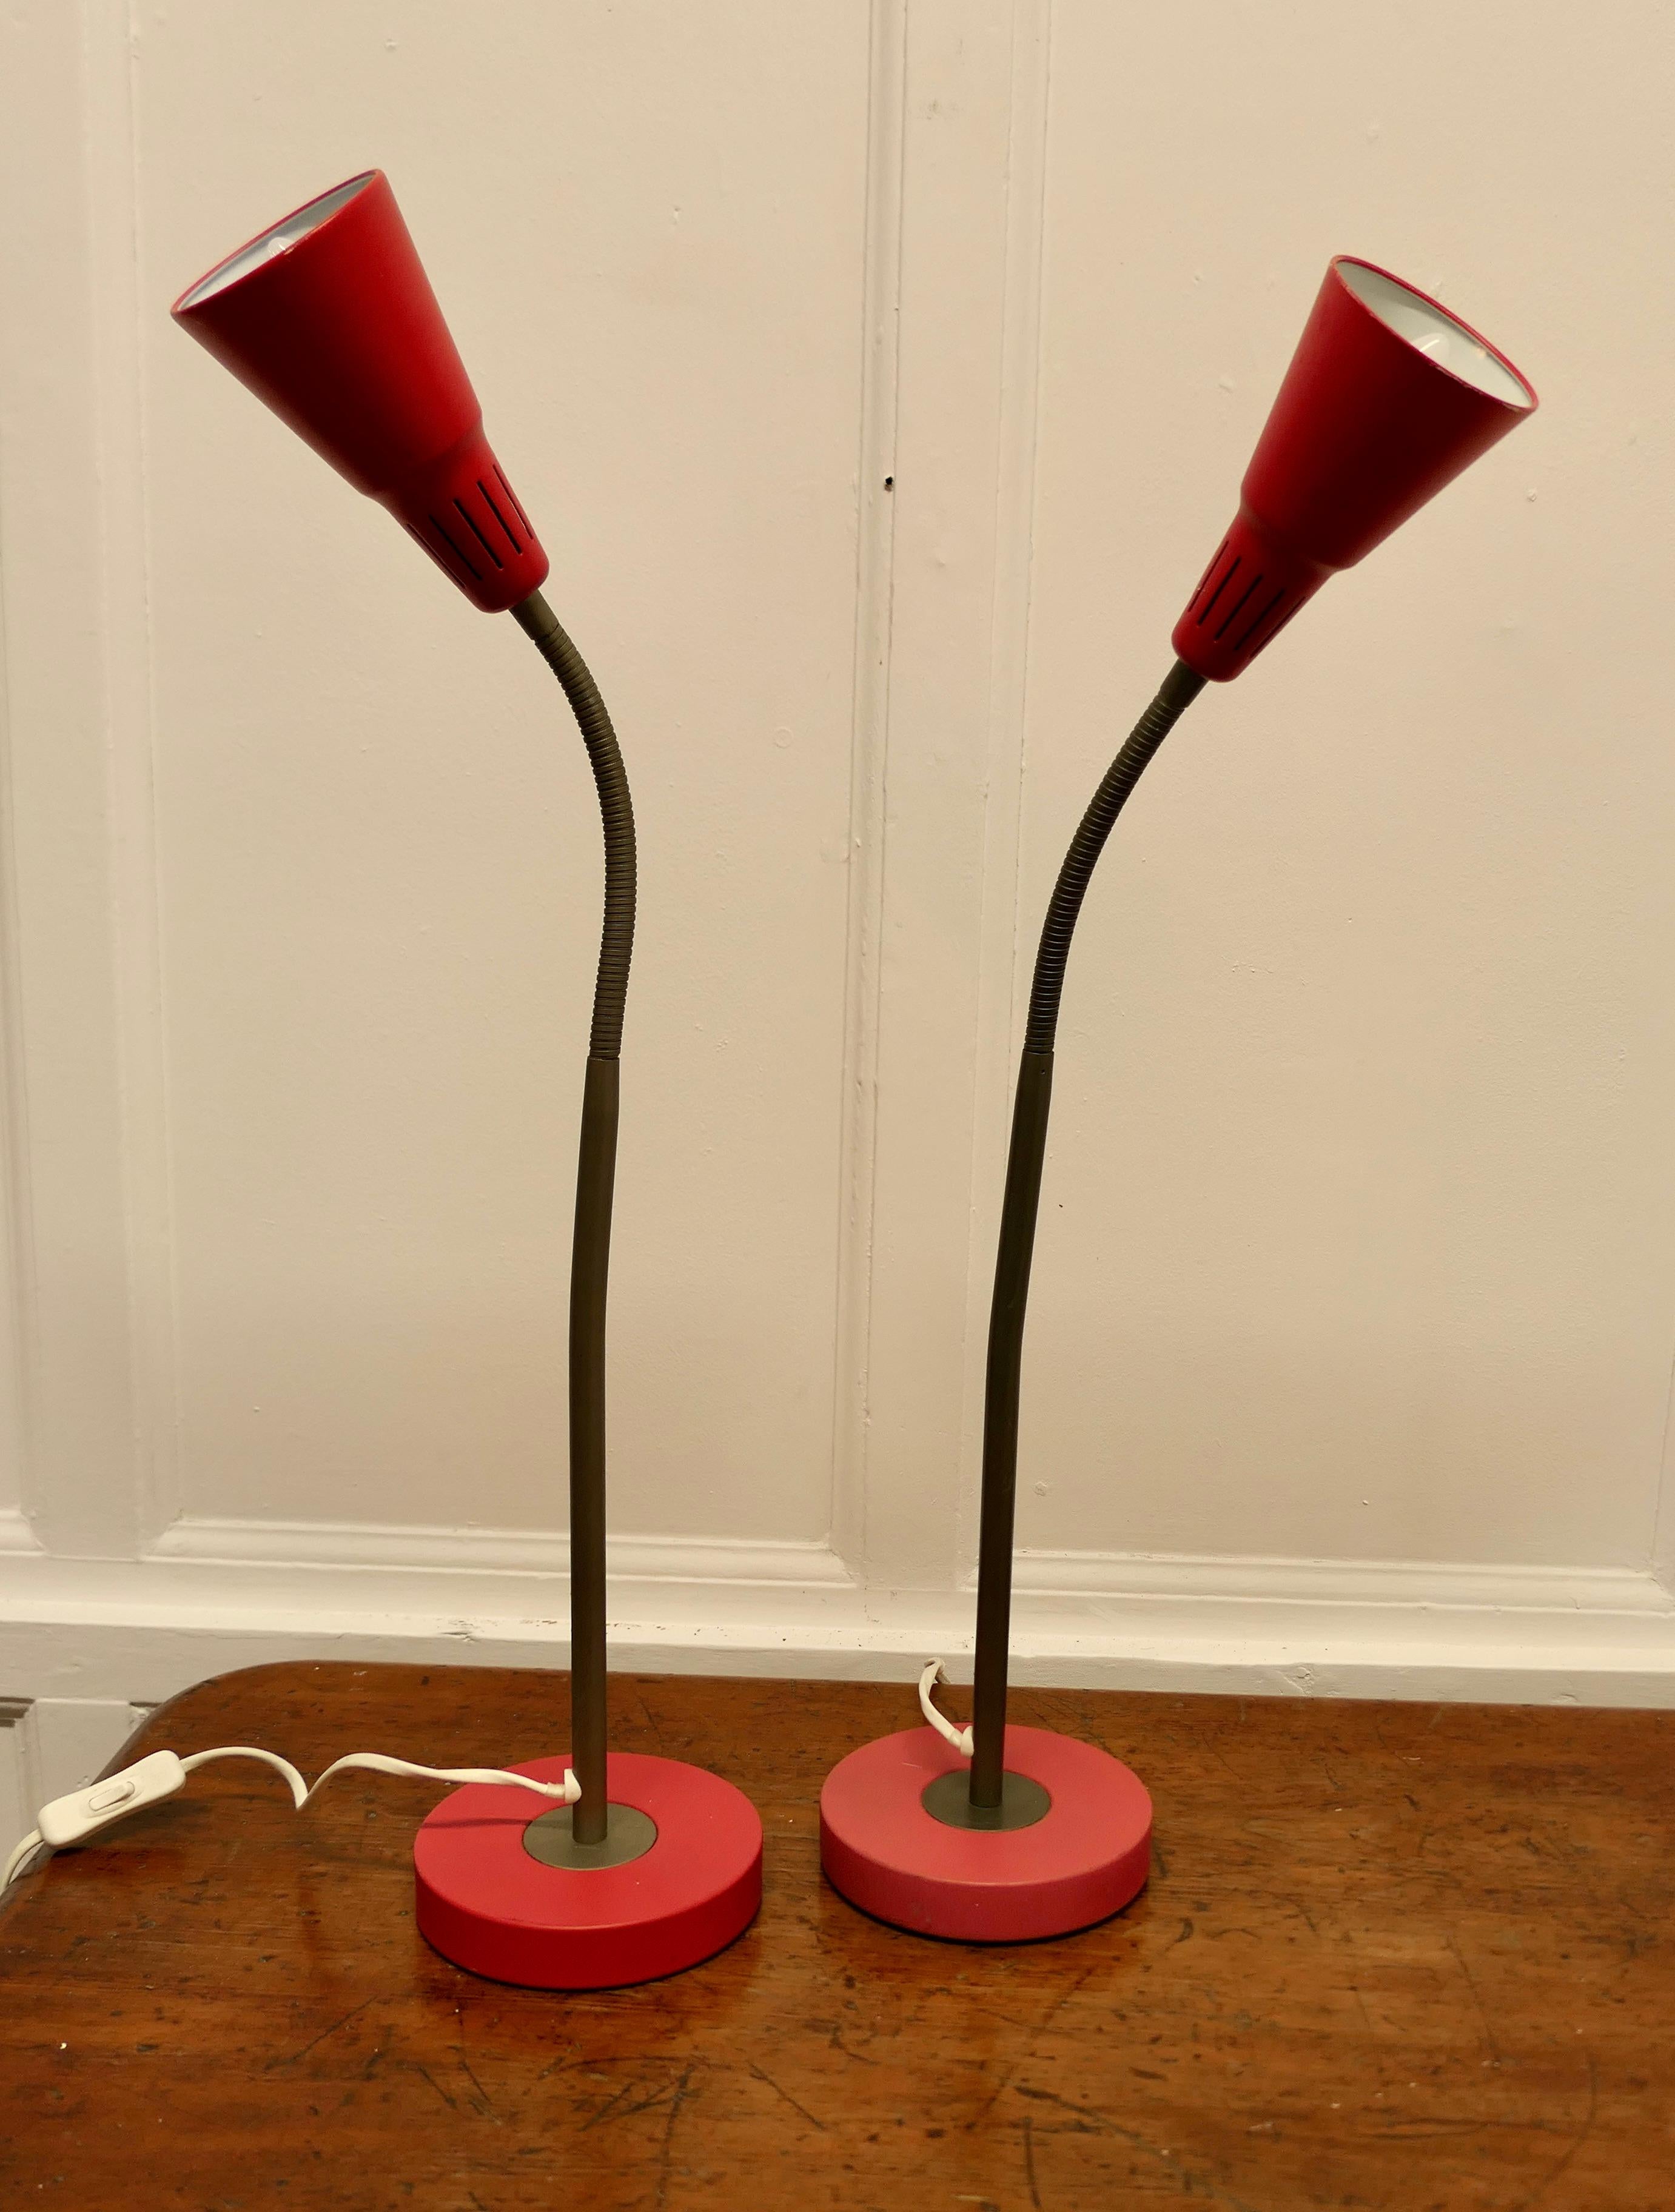 Pair of Vintage Retro French Angle Desk Lamps Very Stylish Statement Pieces i In Good Condition For Sale In Chillerton, Isle of Wight